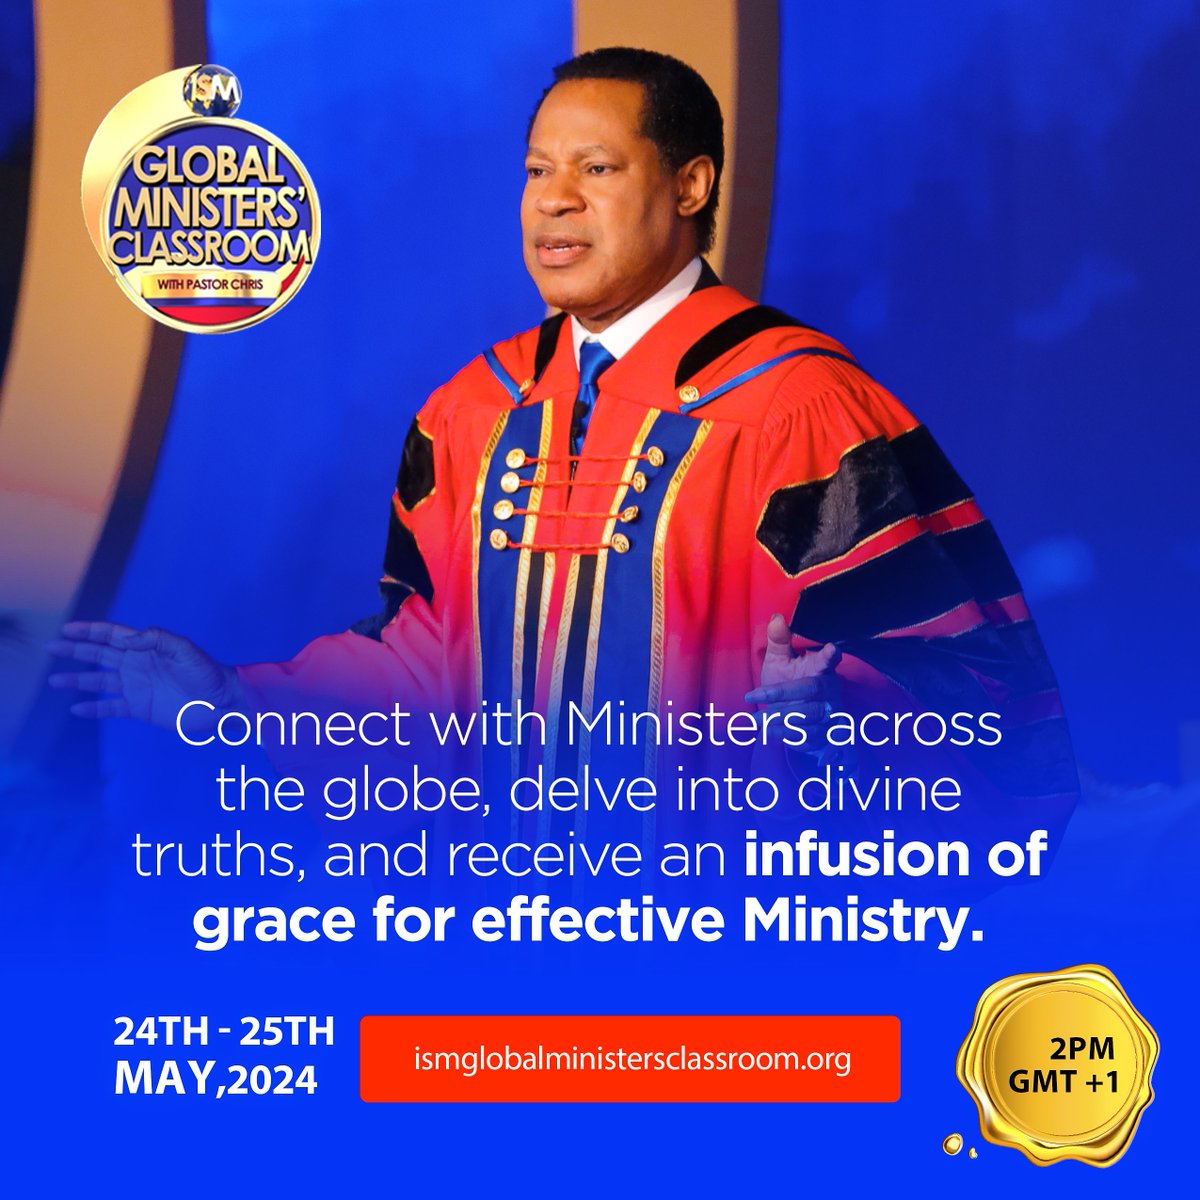 Connect with Ministers across the globe, delve into divine truths, and receive an infusion of grace for effective Ministry.  

Register today bit.ly/gmc2024 

#ISMGMC #ISMGMC2024 #ISMGMC6thEdition #ISMGGMCwithPastorChris #JesusChrist #HolySpirit